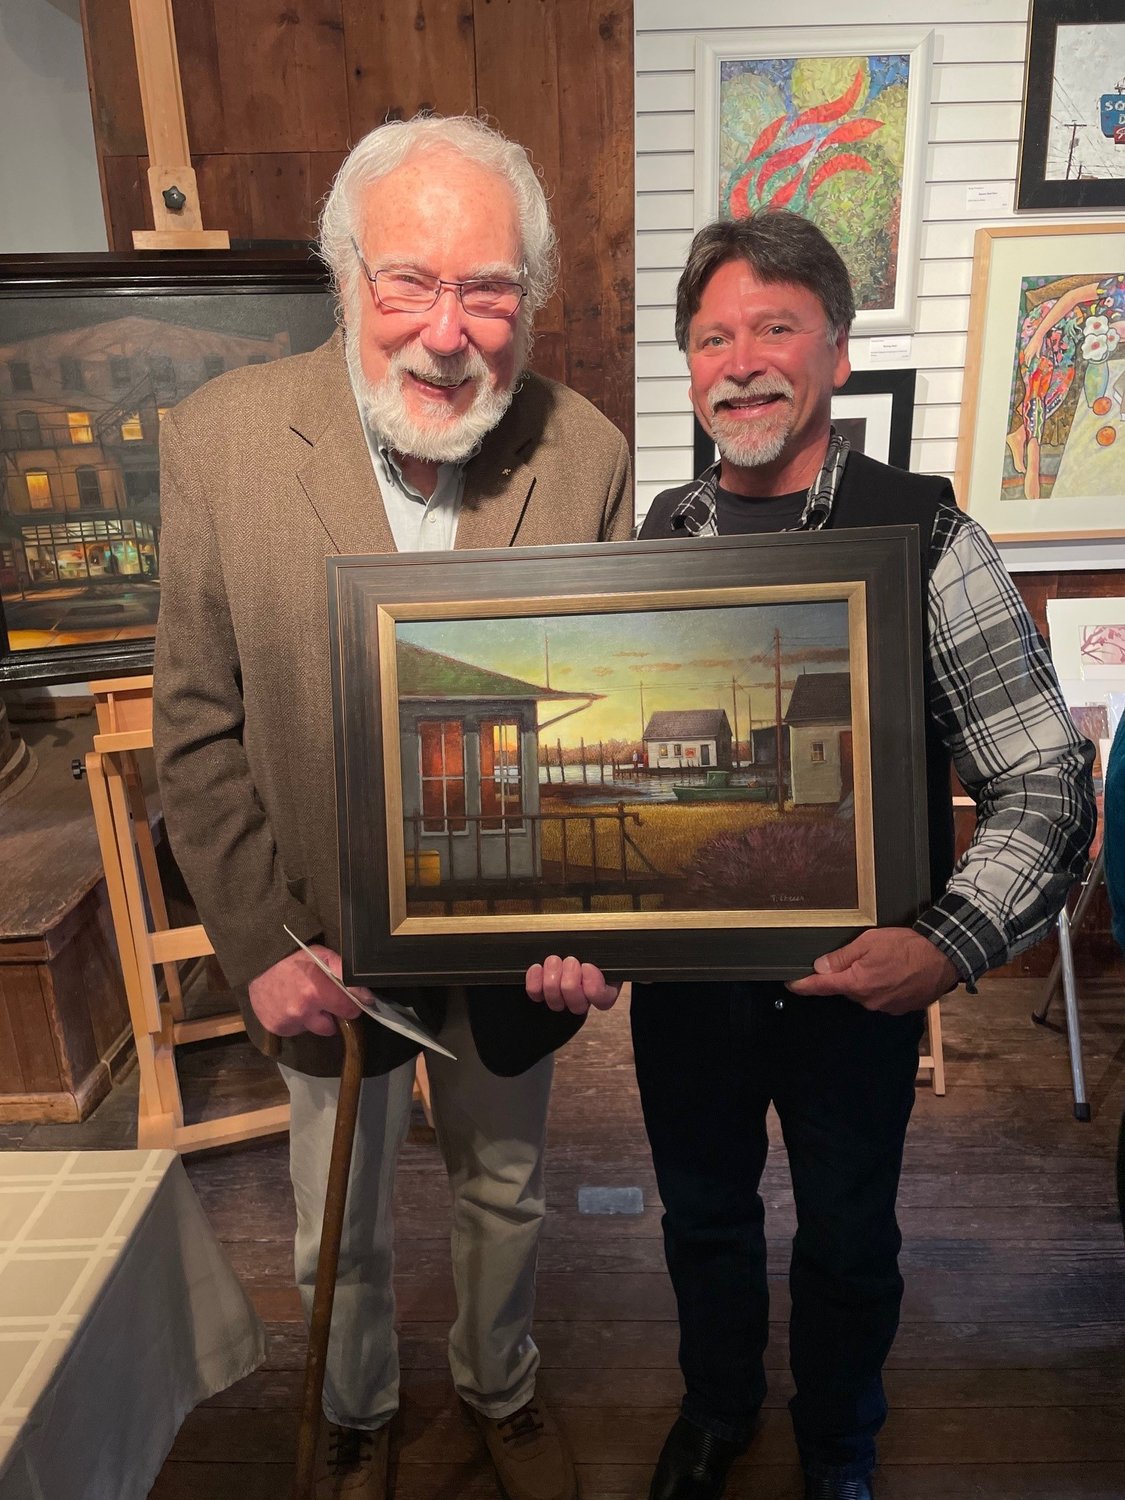 Artist Tom Chesar and his painting, “Oyster Creek II,” winner of Most Outstanding Submission, with buyer Michael Leuz.